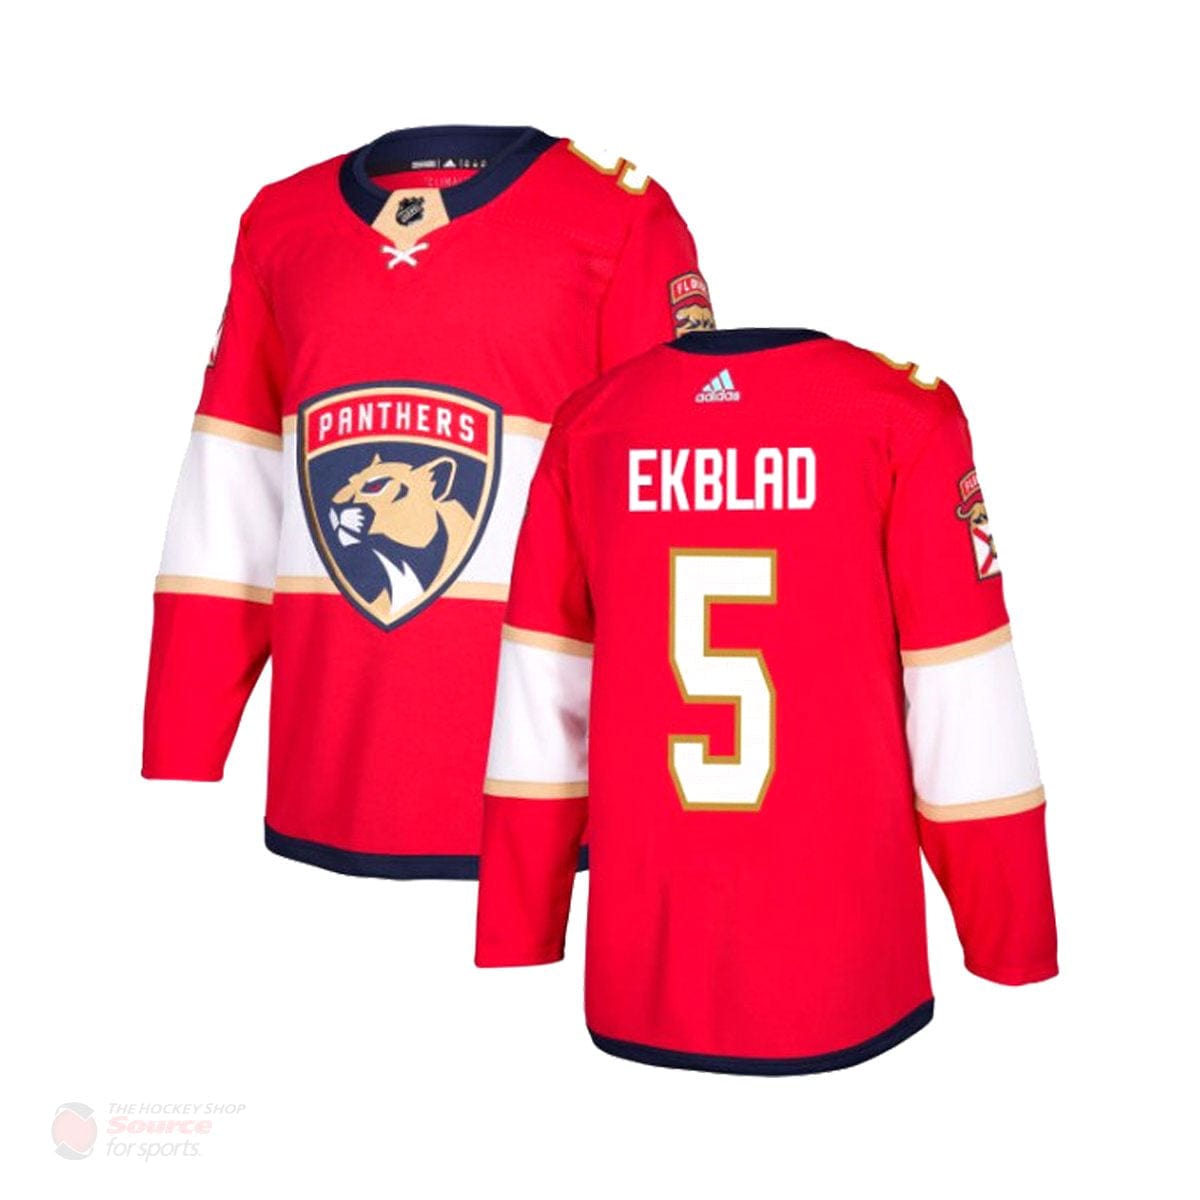 Florida Panthers Adidas Primegreen Authentic NHL Hockey Jersey / Home / L/52